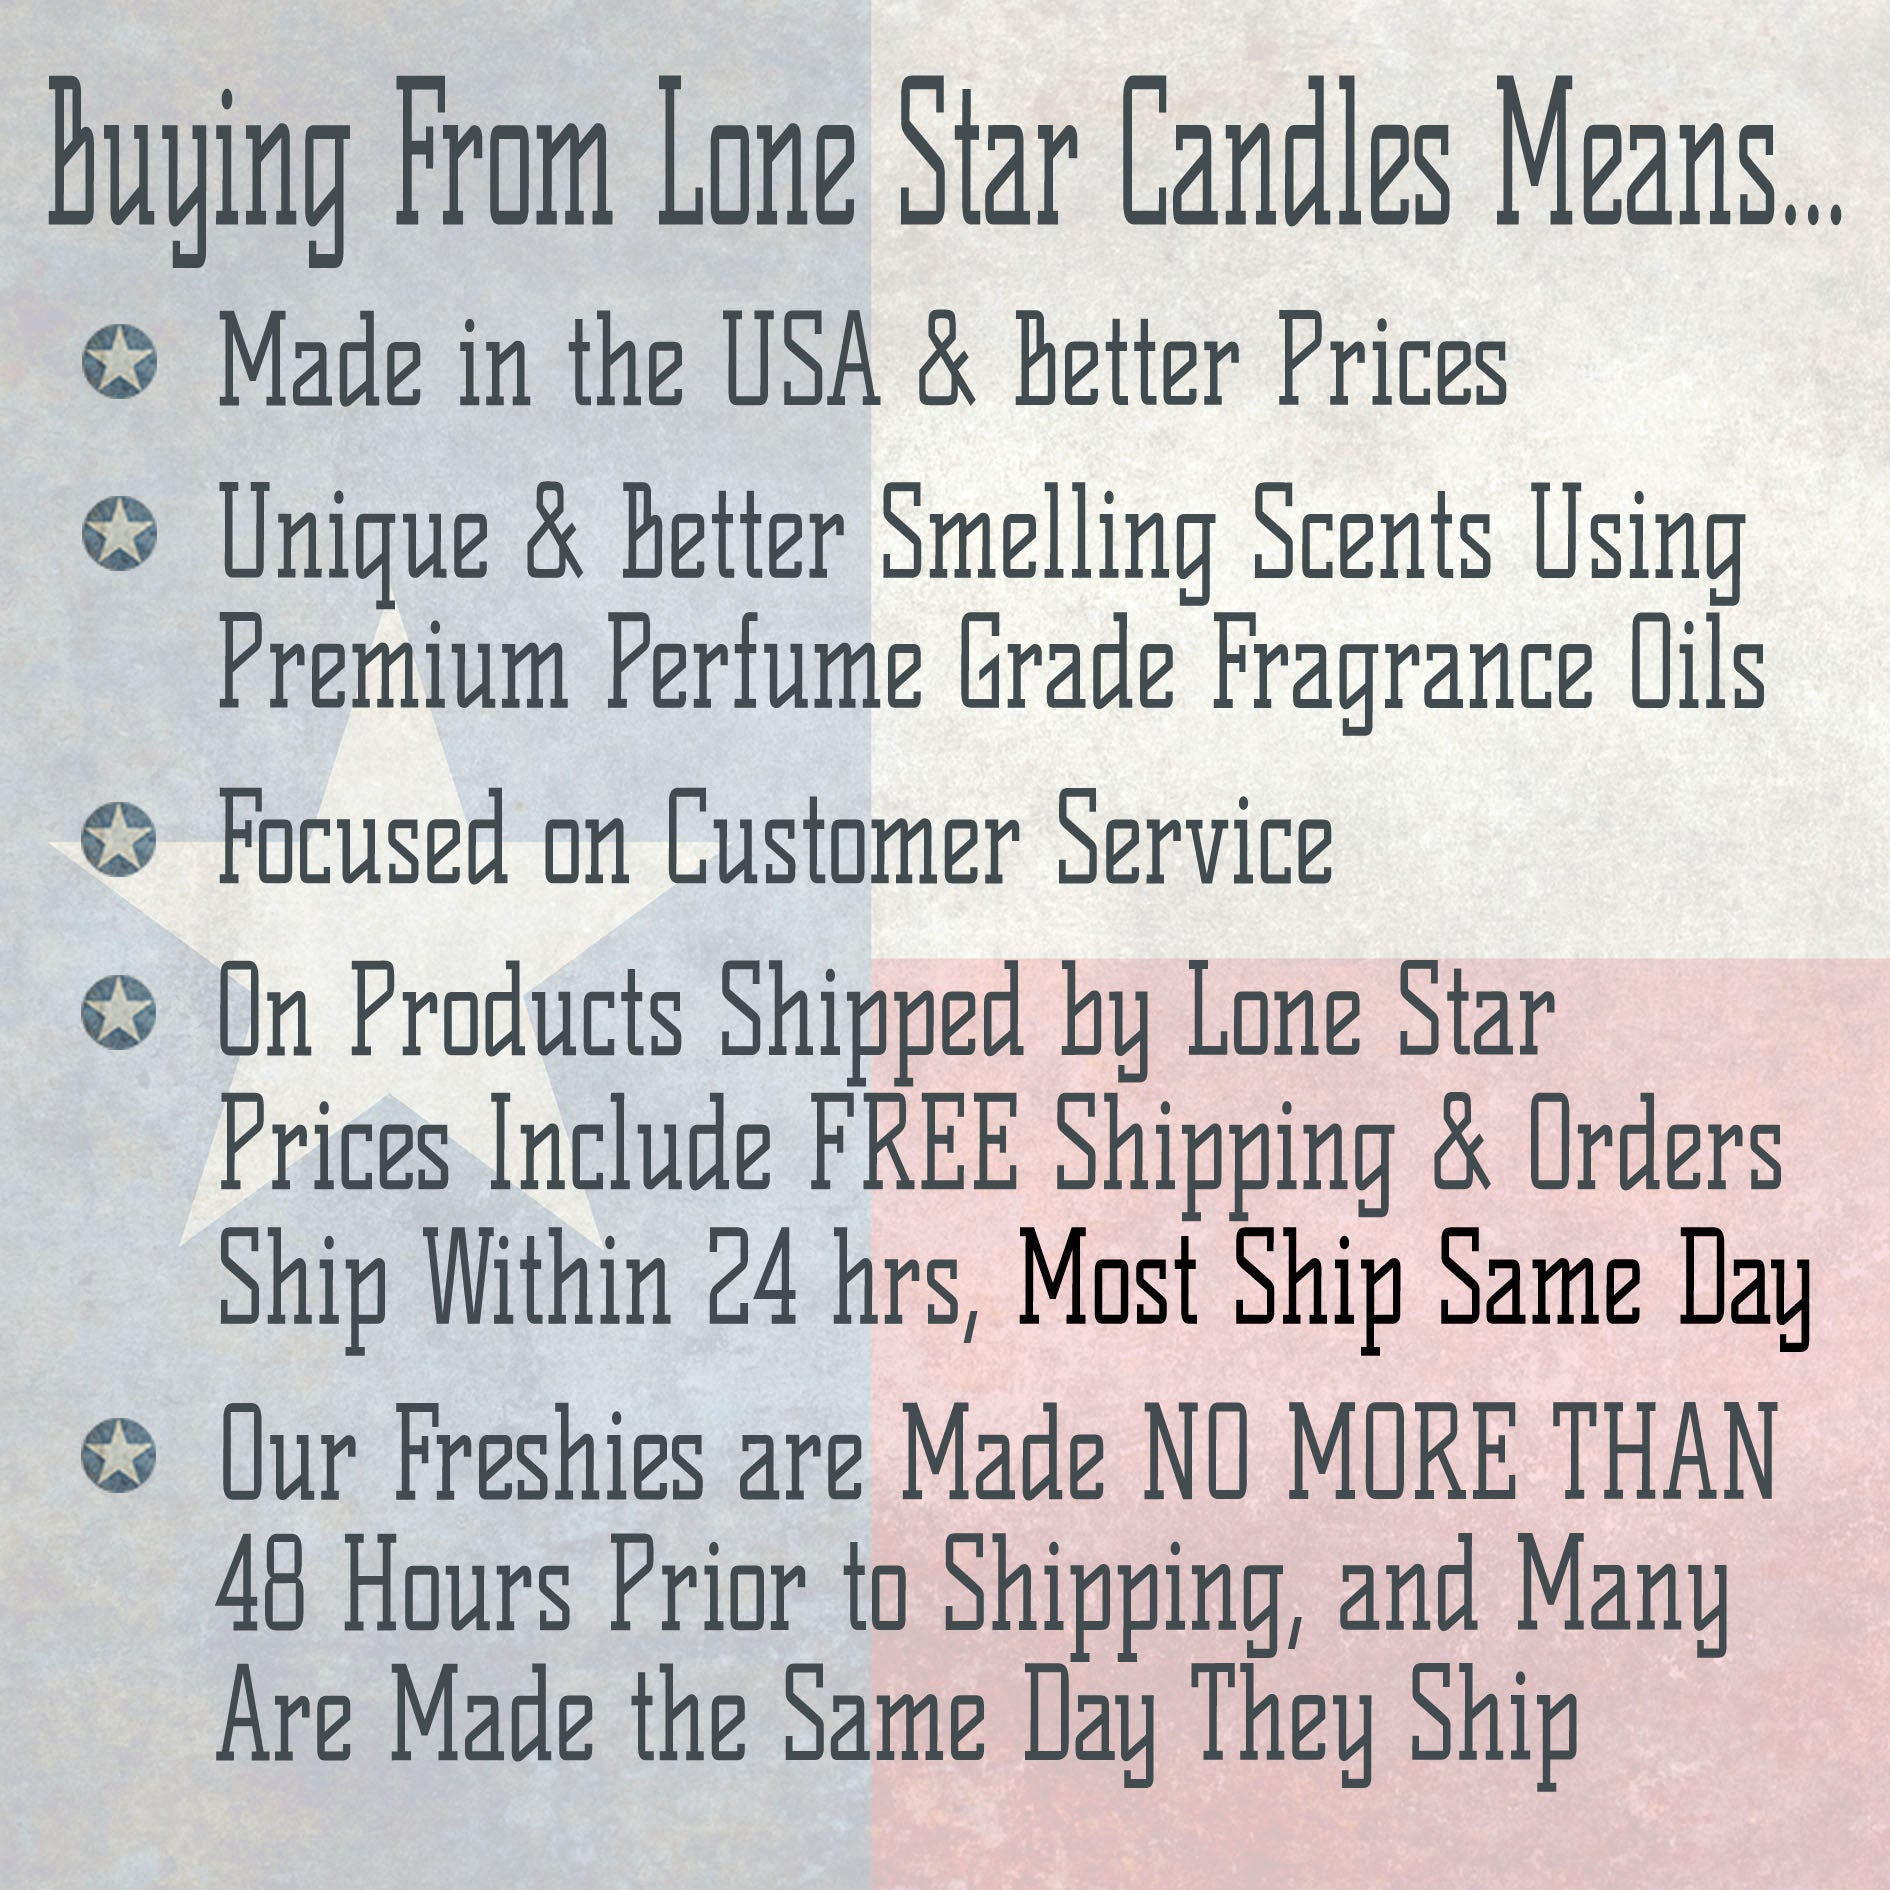 Leather & Lace, Lone Star Candles & More’s Premium Strongly Scented Freshies, Aroma of Genuine Leather and Creamy Vanilla, Car & Air Freshener, USA Made in Texas, Chili Pepper 1-Pack